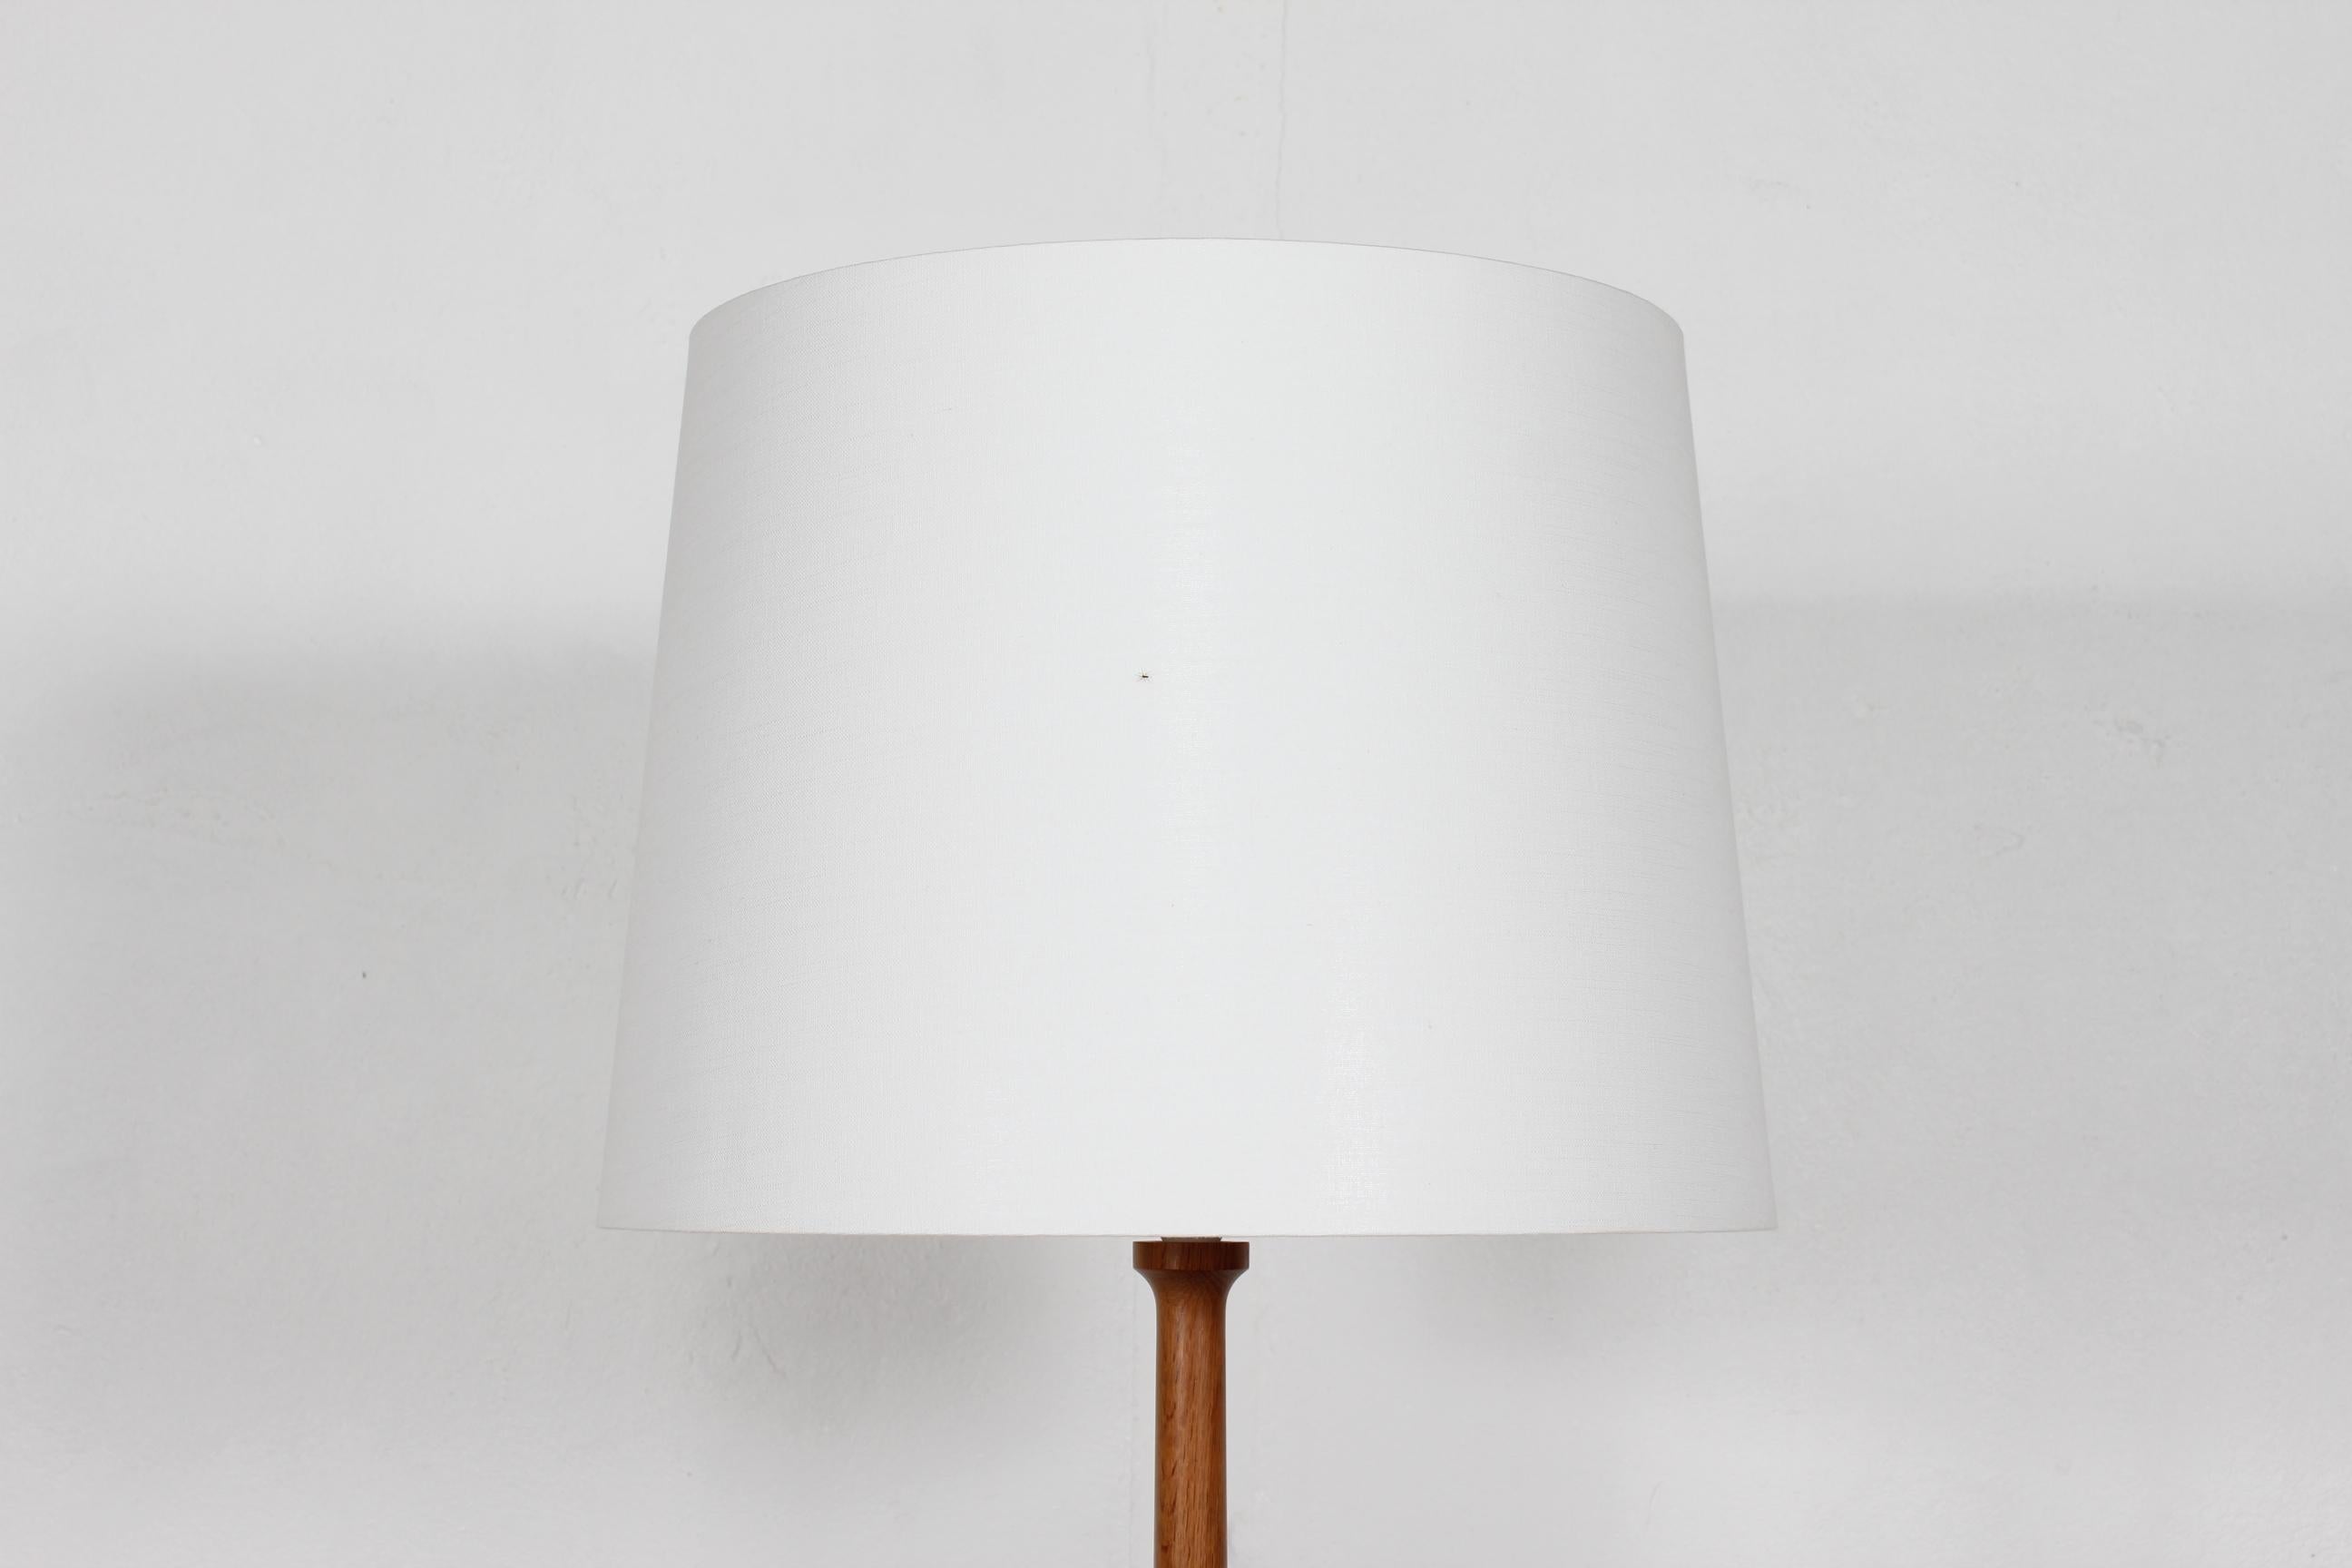 Teak floor lamp by Danish designer Lisbeth Brams manufactured by Fog & Mørup in Danmark.

The lamp base is made of stave glued and hand-turned solid teak with oil treatment.

Included is a new lamp shade designed and made in Denmark. It is made of